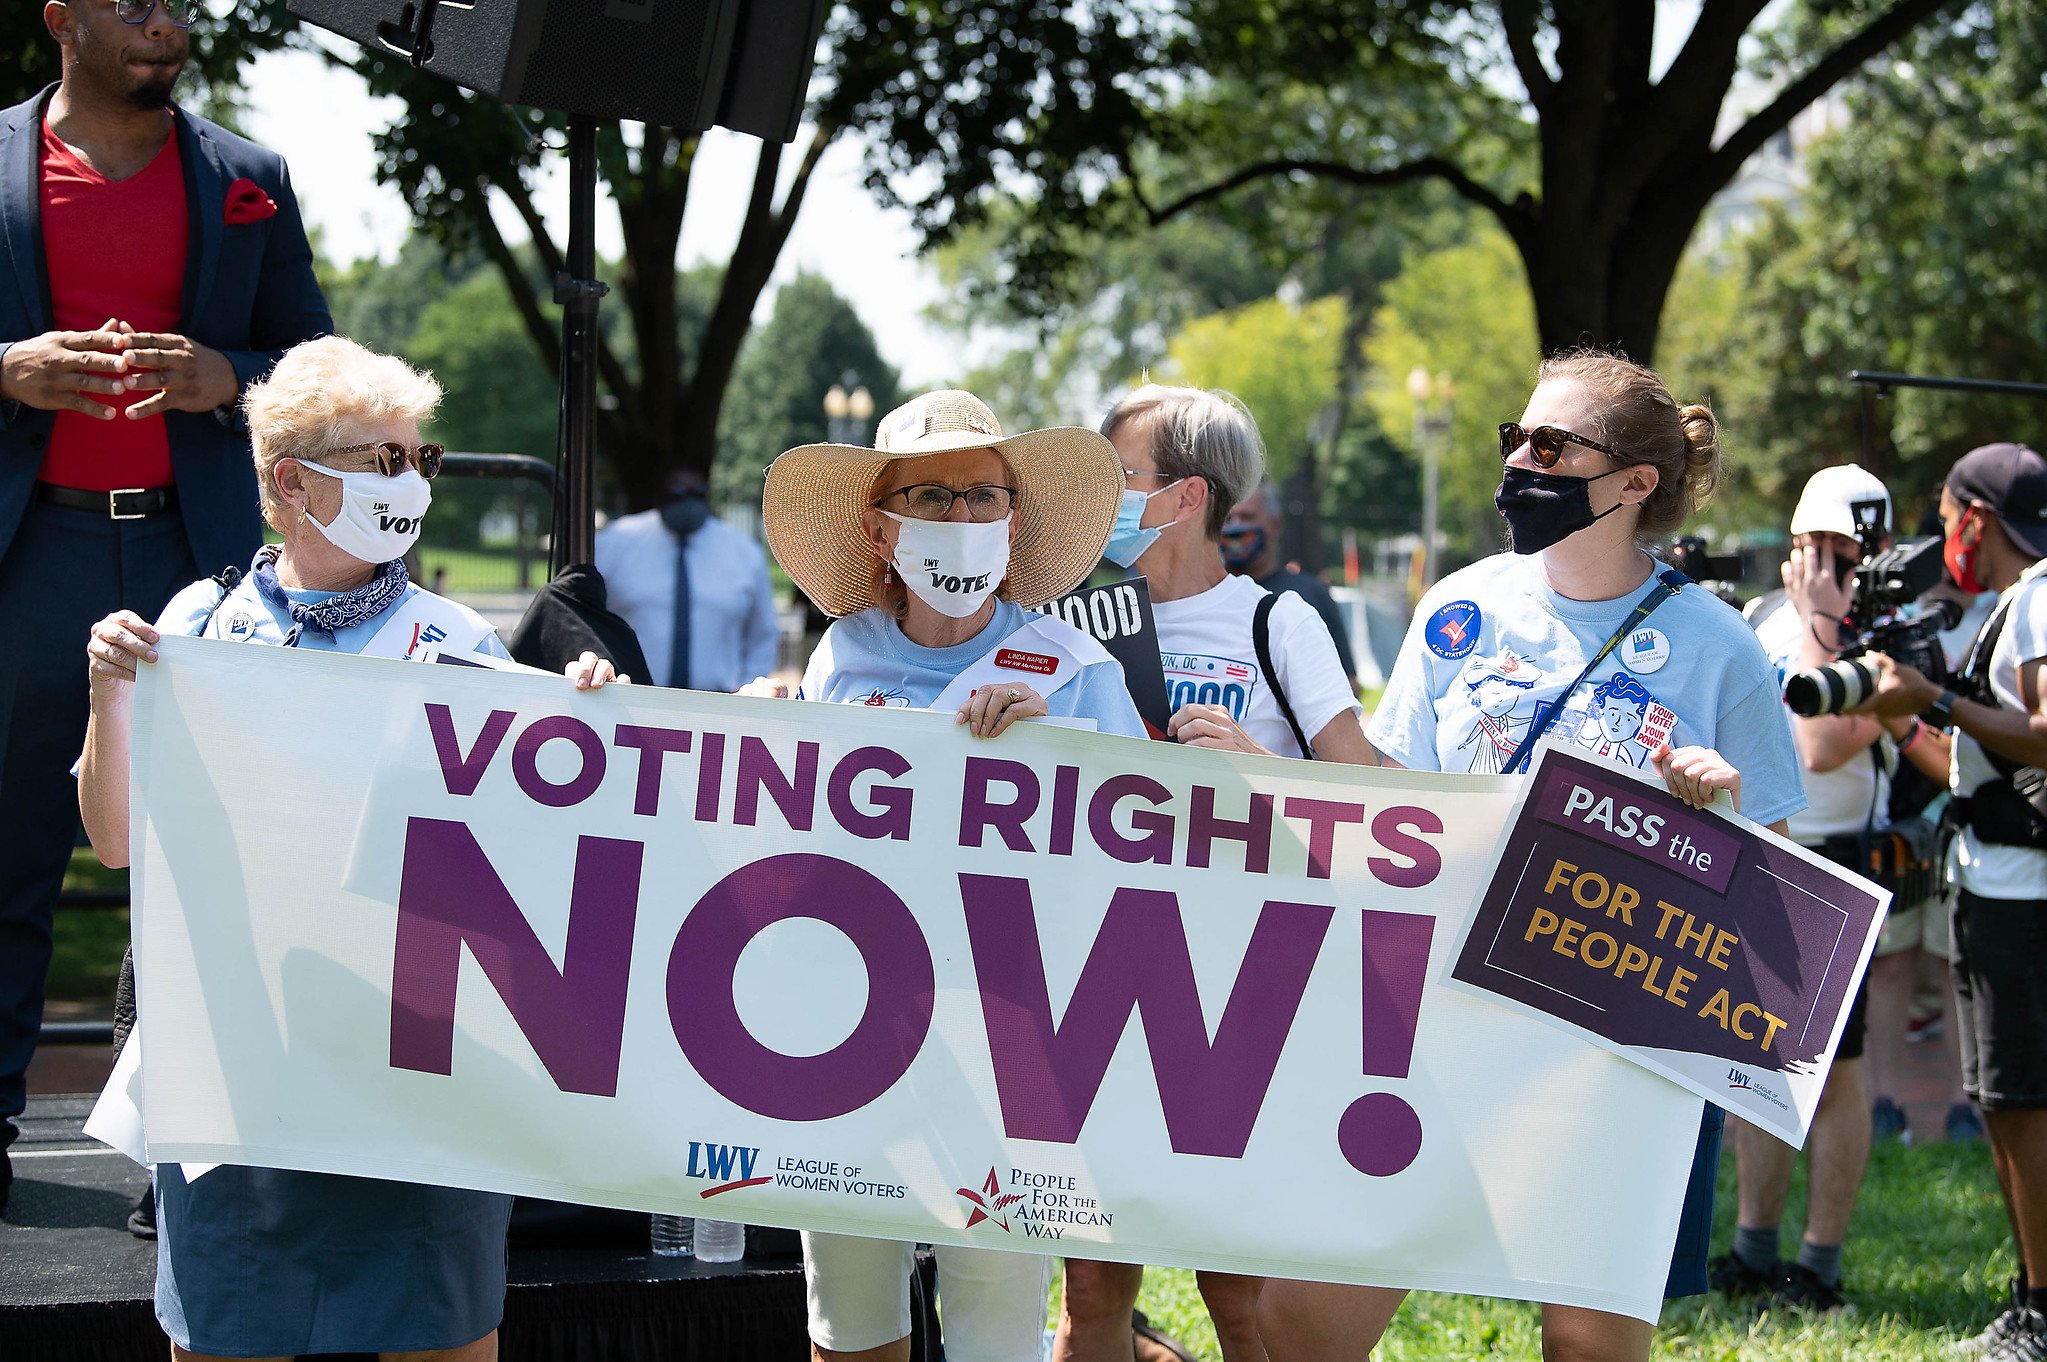 Three League members holding a white "VOTING RIGHTS NOW" banner at a rally in Washington, DC. The League members are wearing sunglasses and masks.